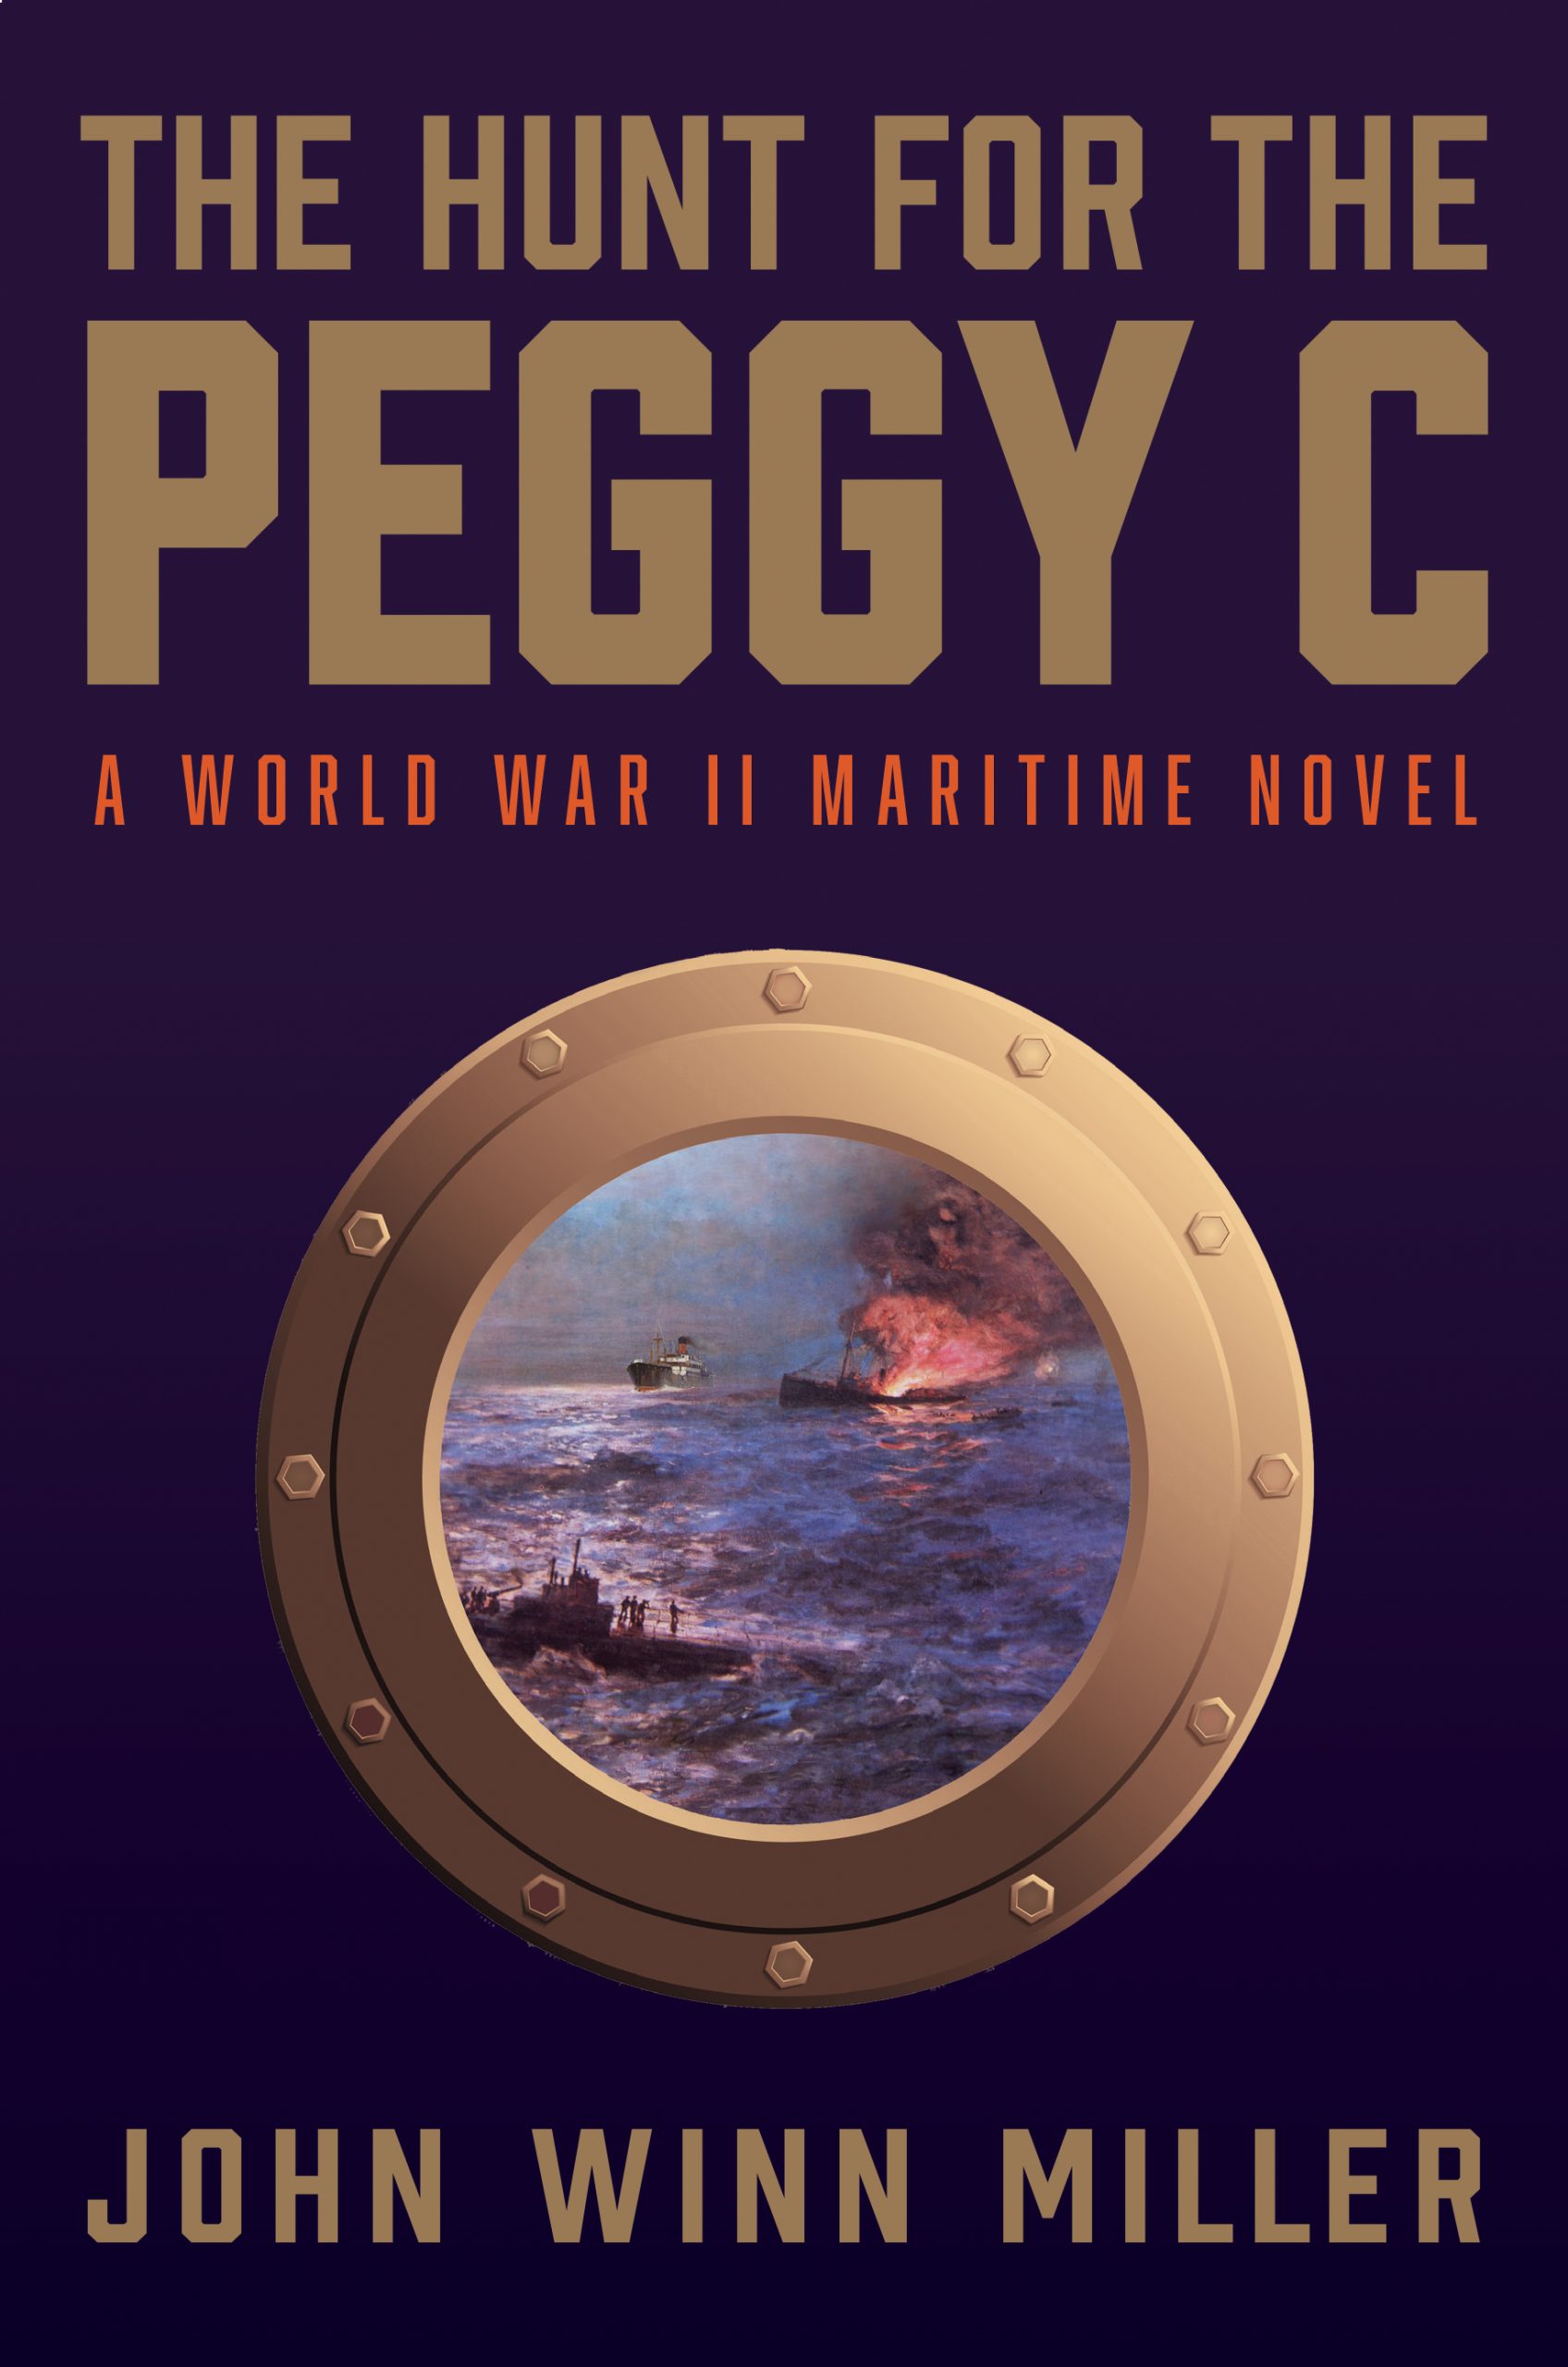 The Hunt for the Peggy C